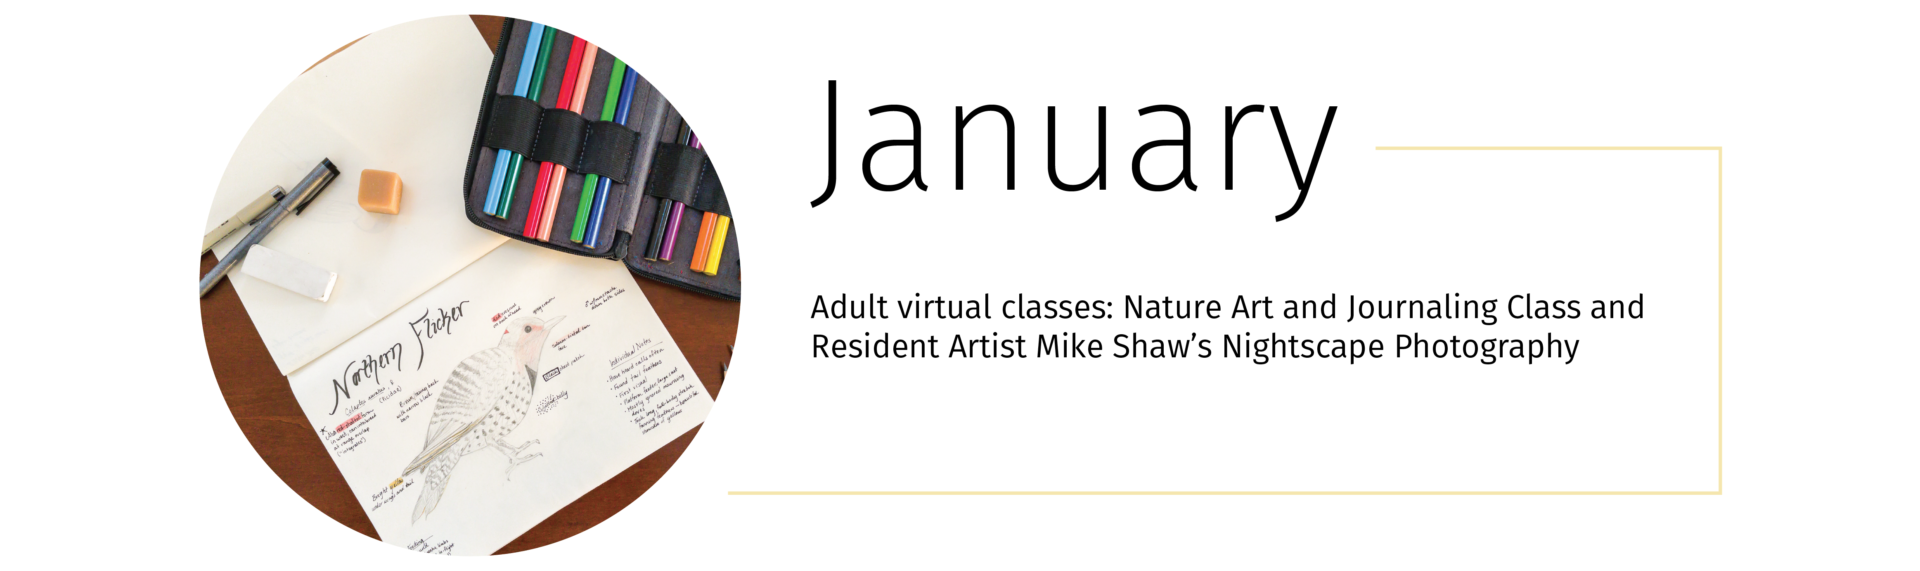 A notebook with some drawings in it and the text, "Adult virtual classes: Nature art and Journaling class and Resident Artist Mike Shaw’s Nightscape Photography"